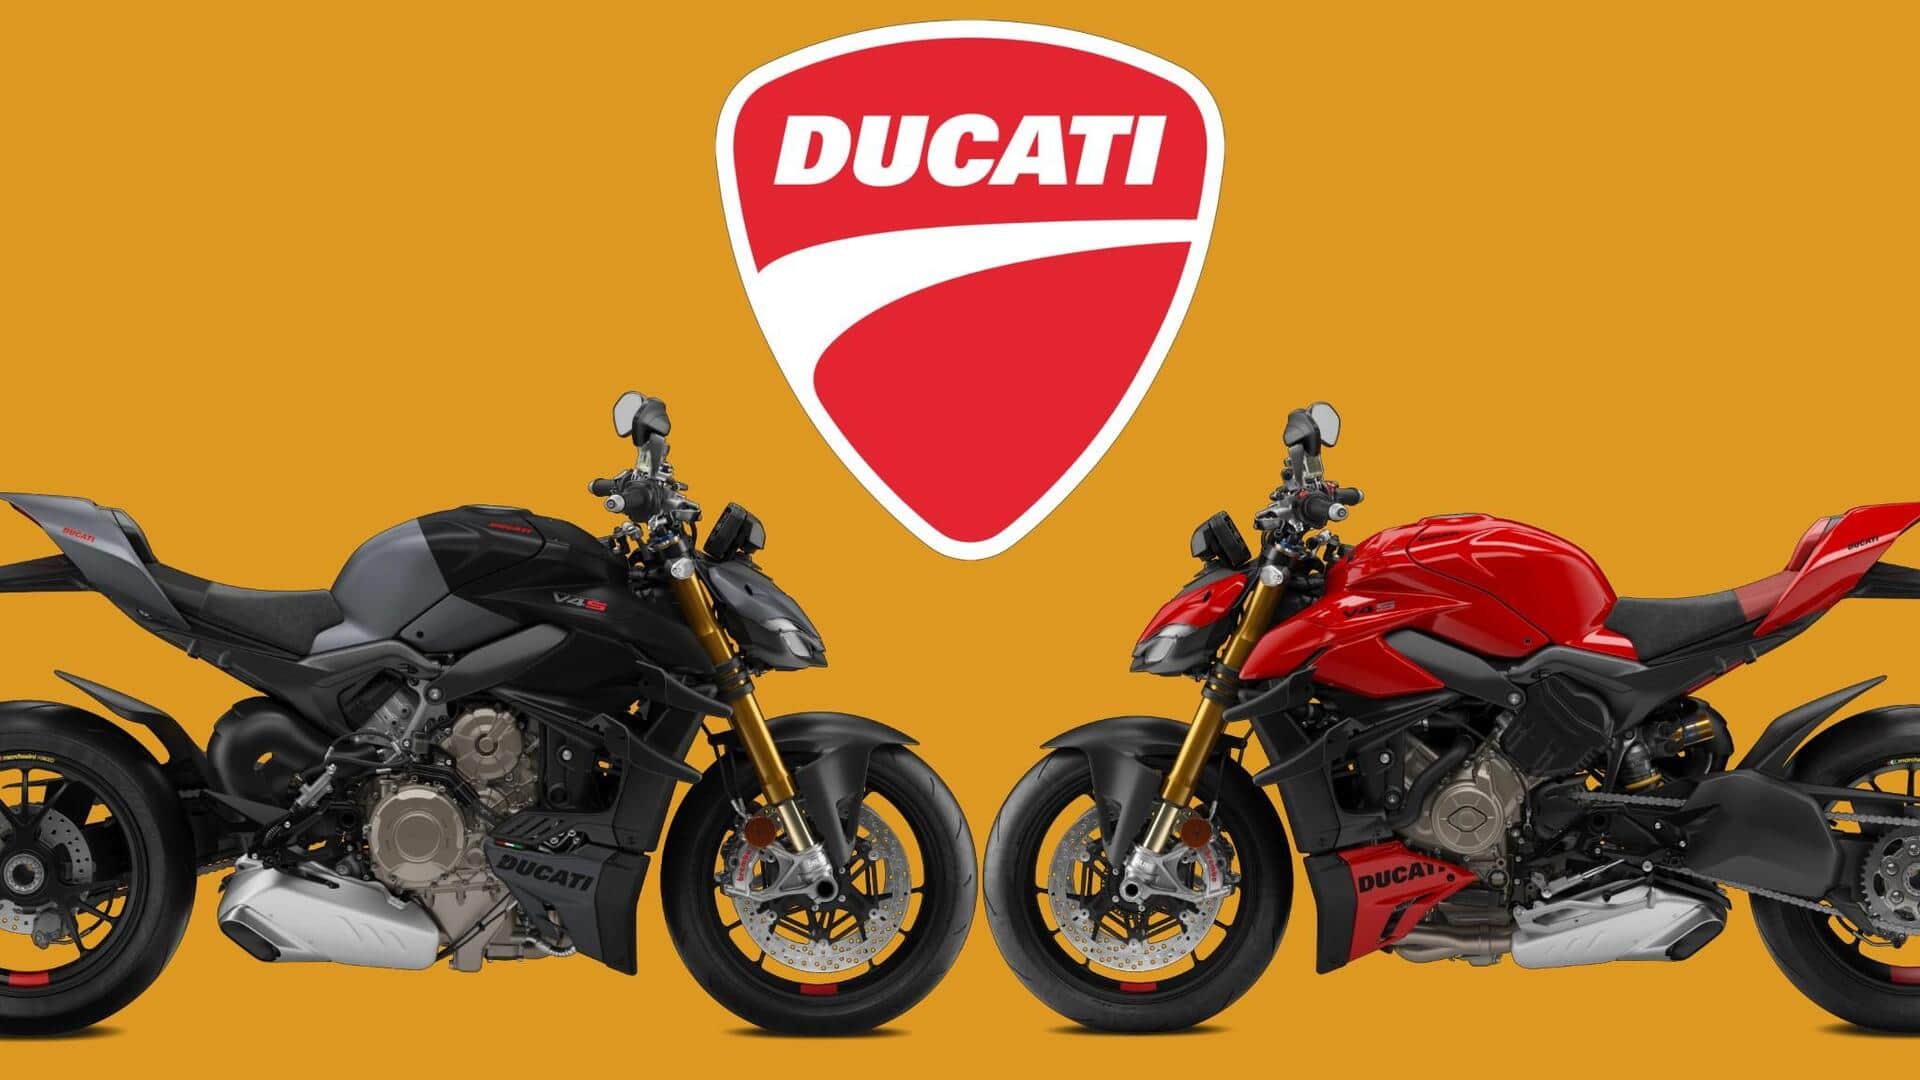 Ducati Streetfighter V4 range launched starting at Rs. 25 lakh